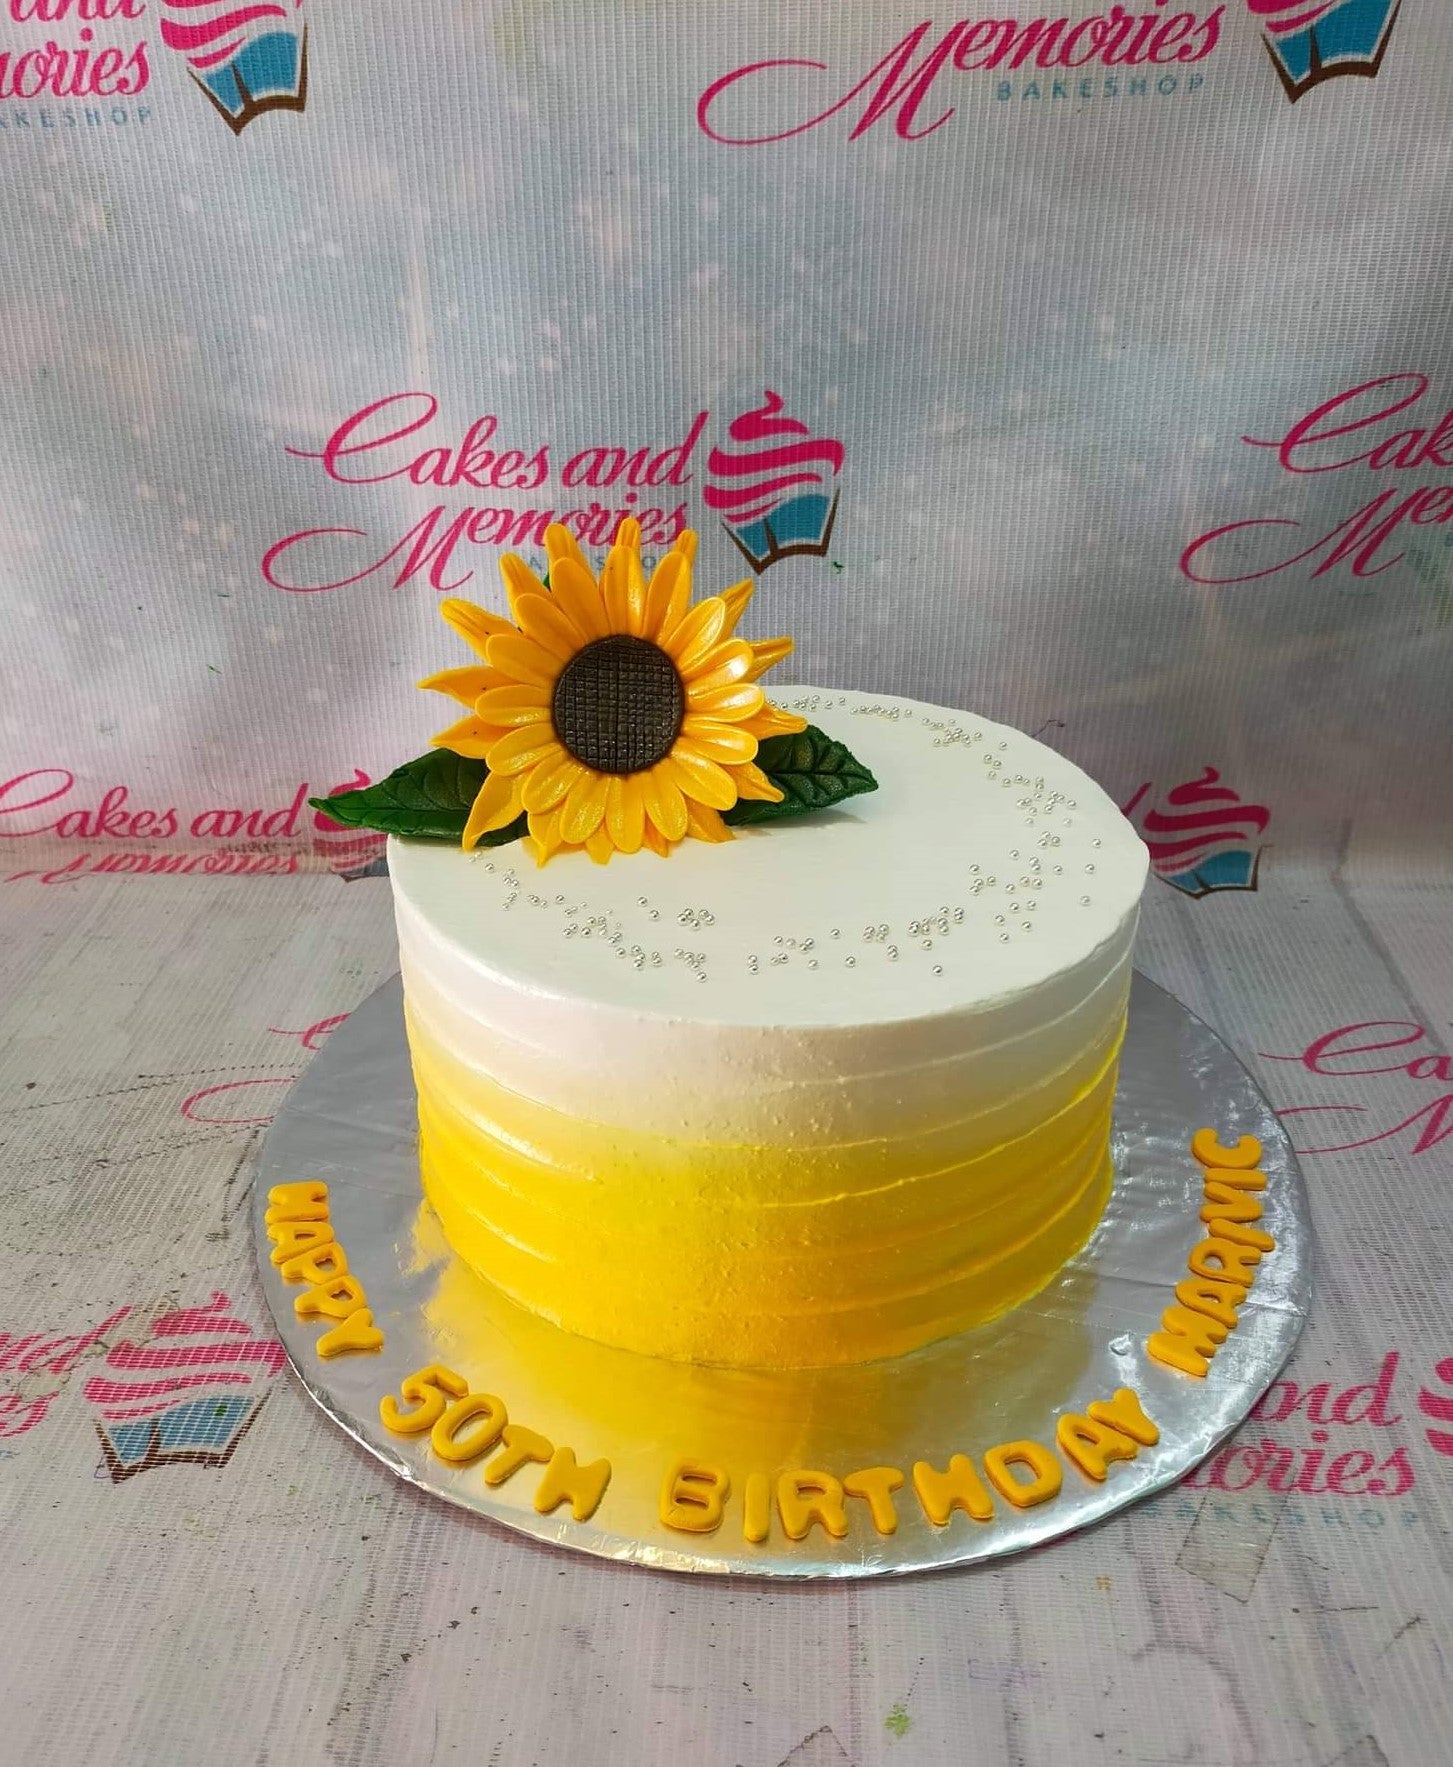 Two-tiered Textured Sunflower Wedding Cake - Tasty Pastry Bakery Tallahassee